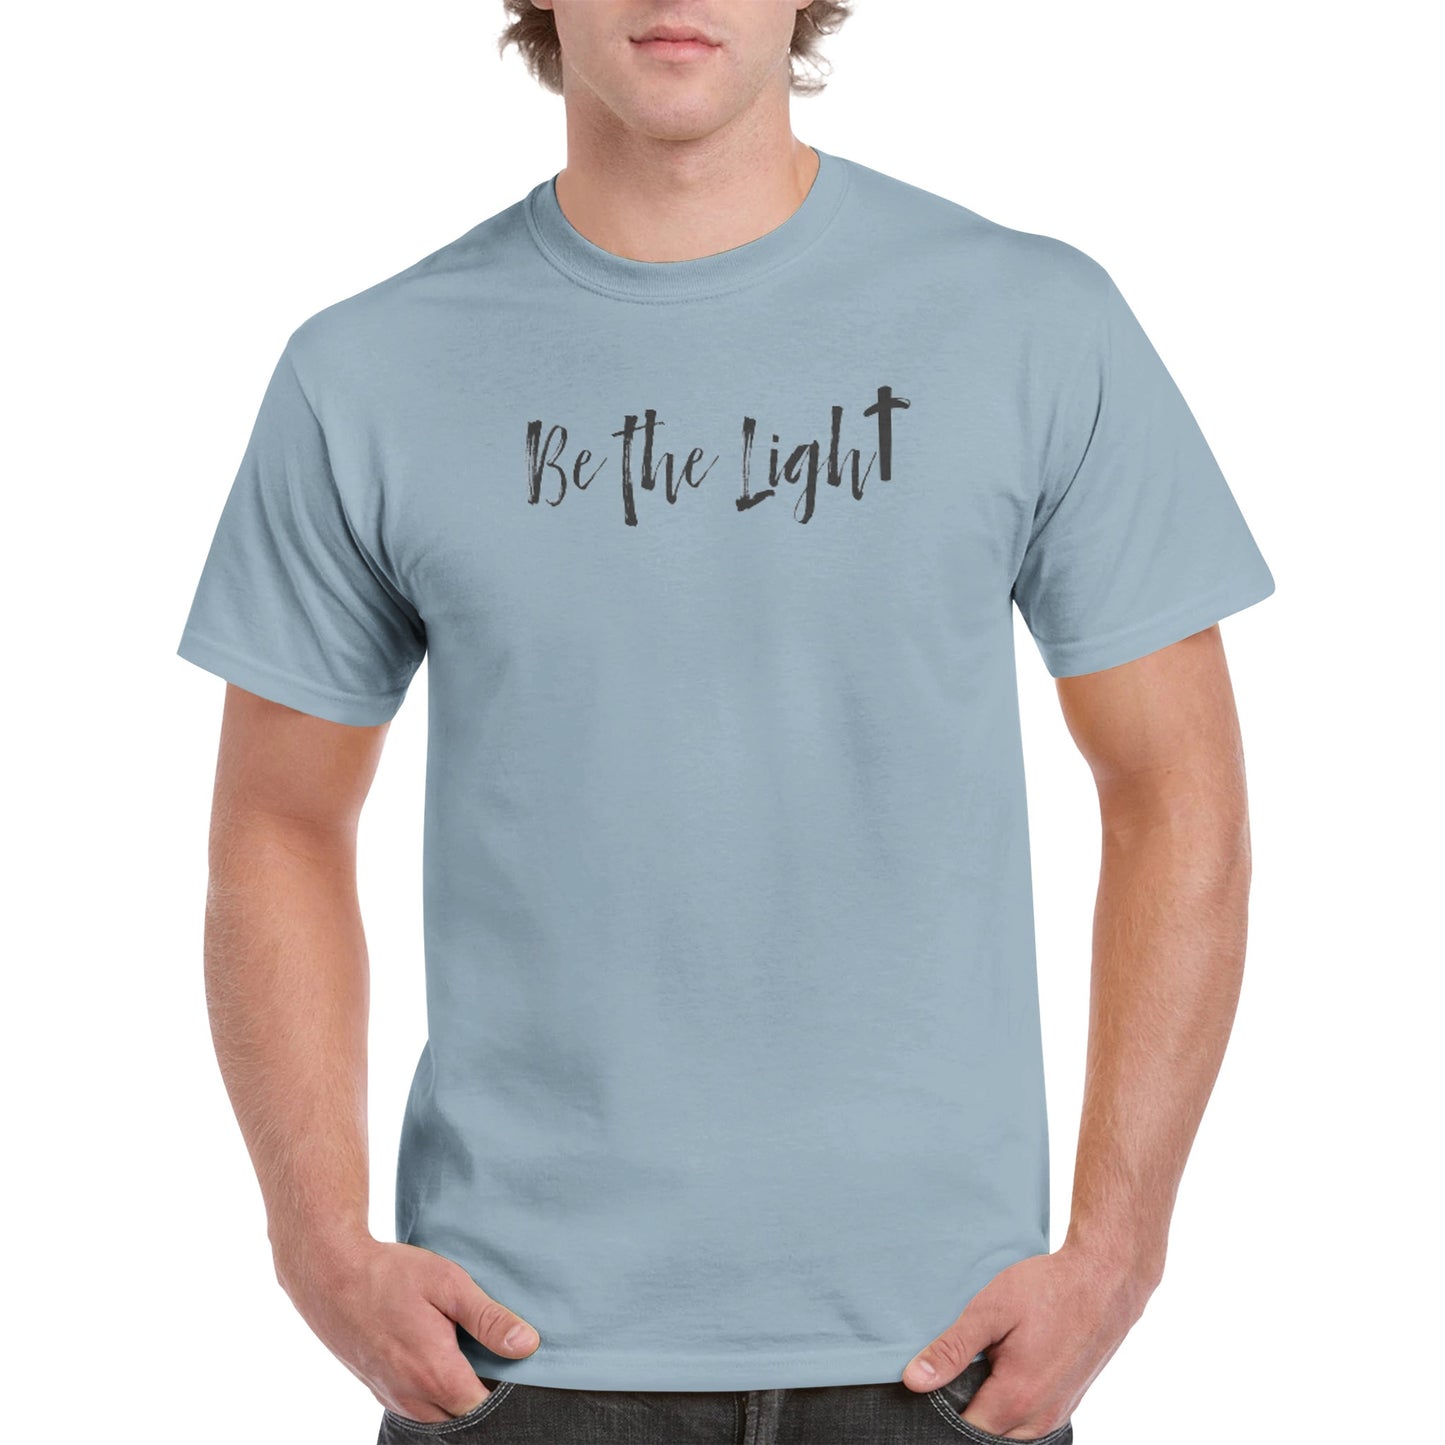 Be the Light - Front / Be Kind On Back